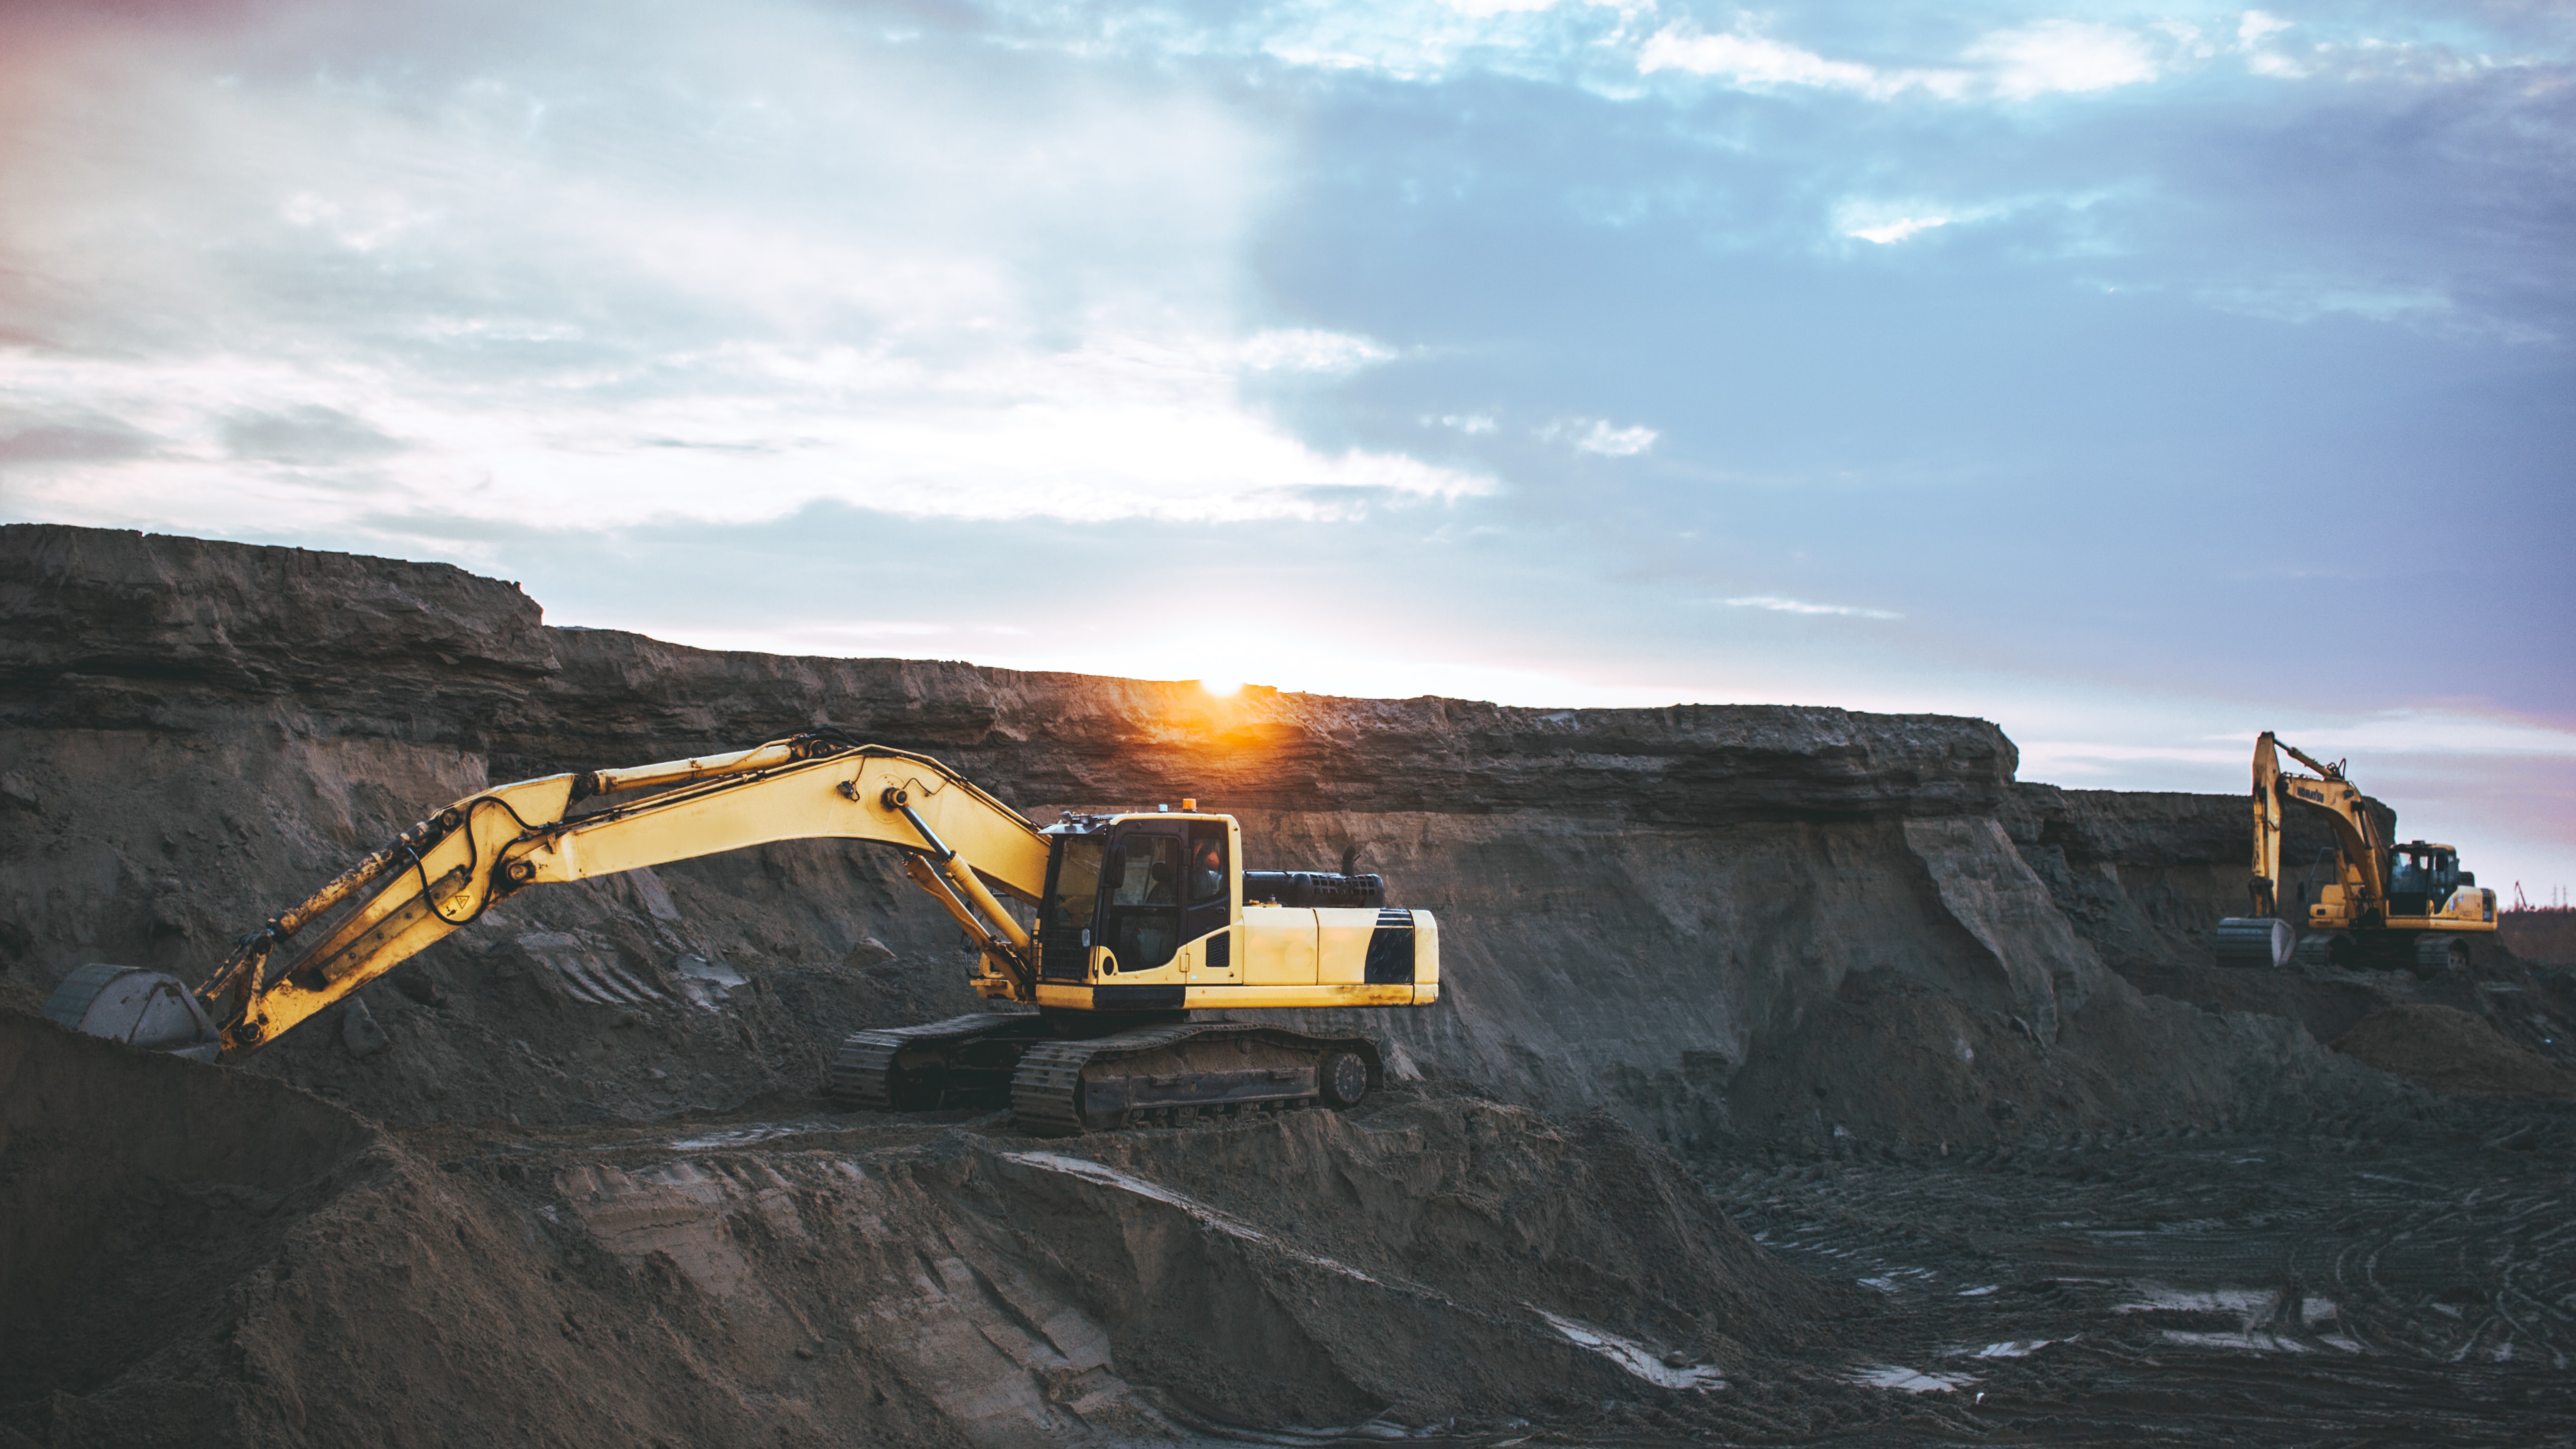 SimWell Uses Simulation to Help a Mining Company Become More Efficient & Reduce Its Environmental Impact